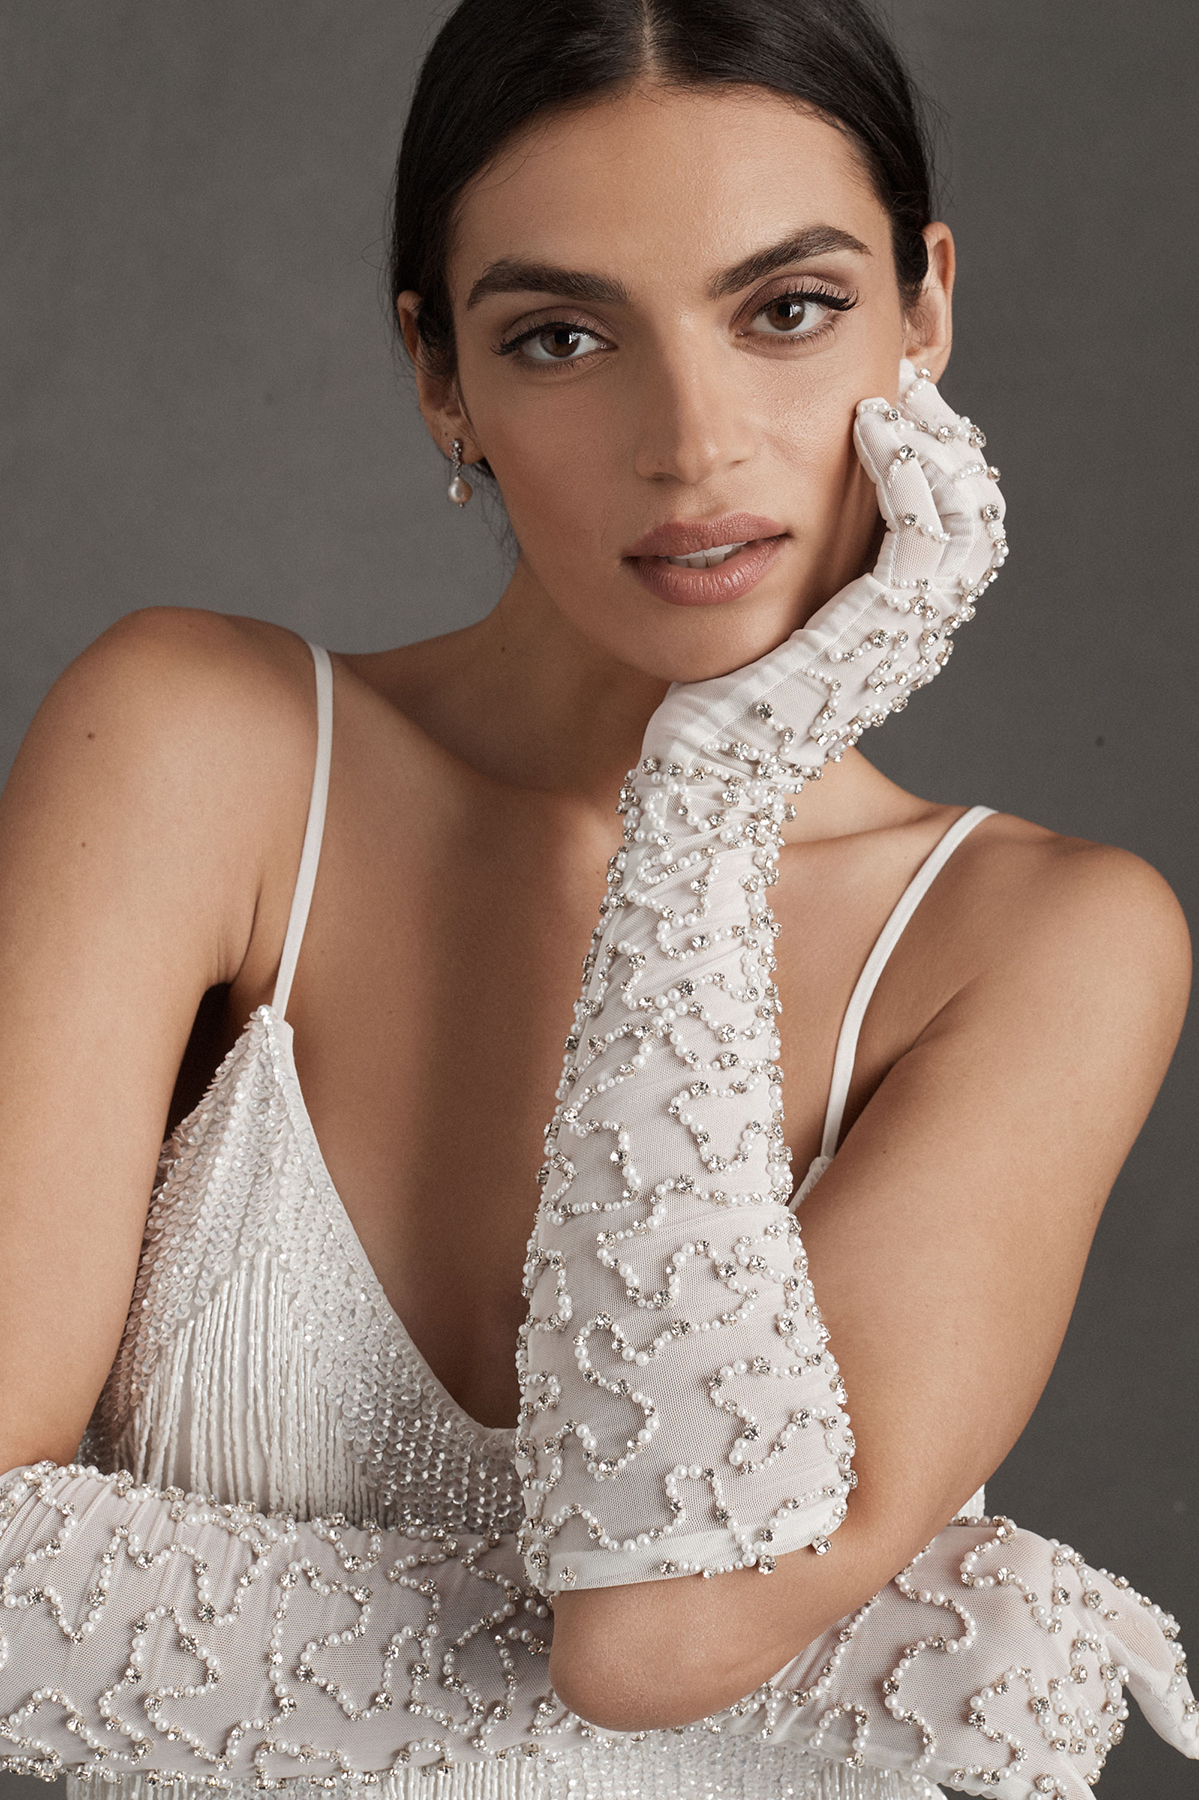 These embellished gloves are a unique accessory for the bride.